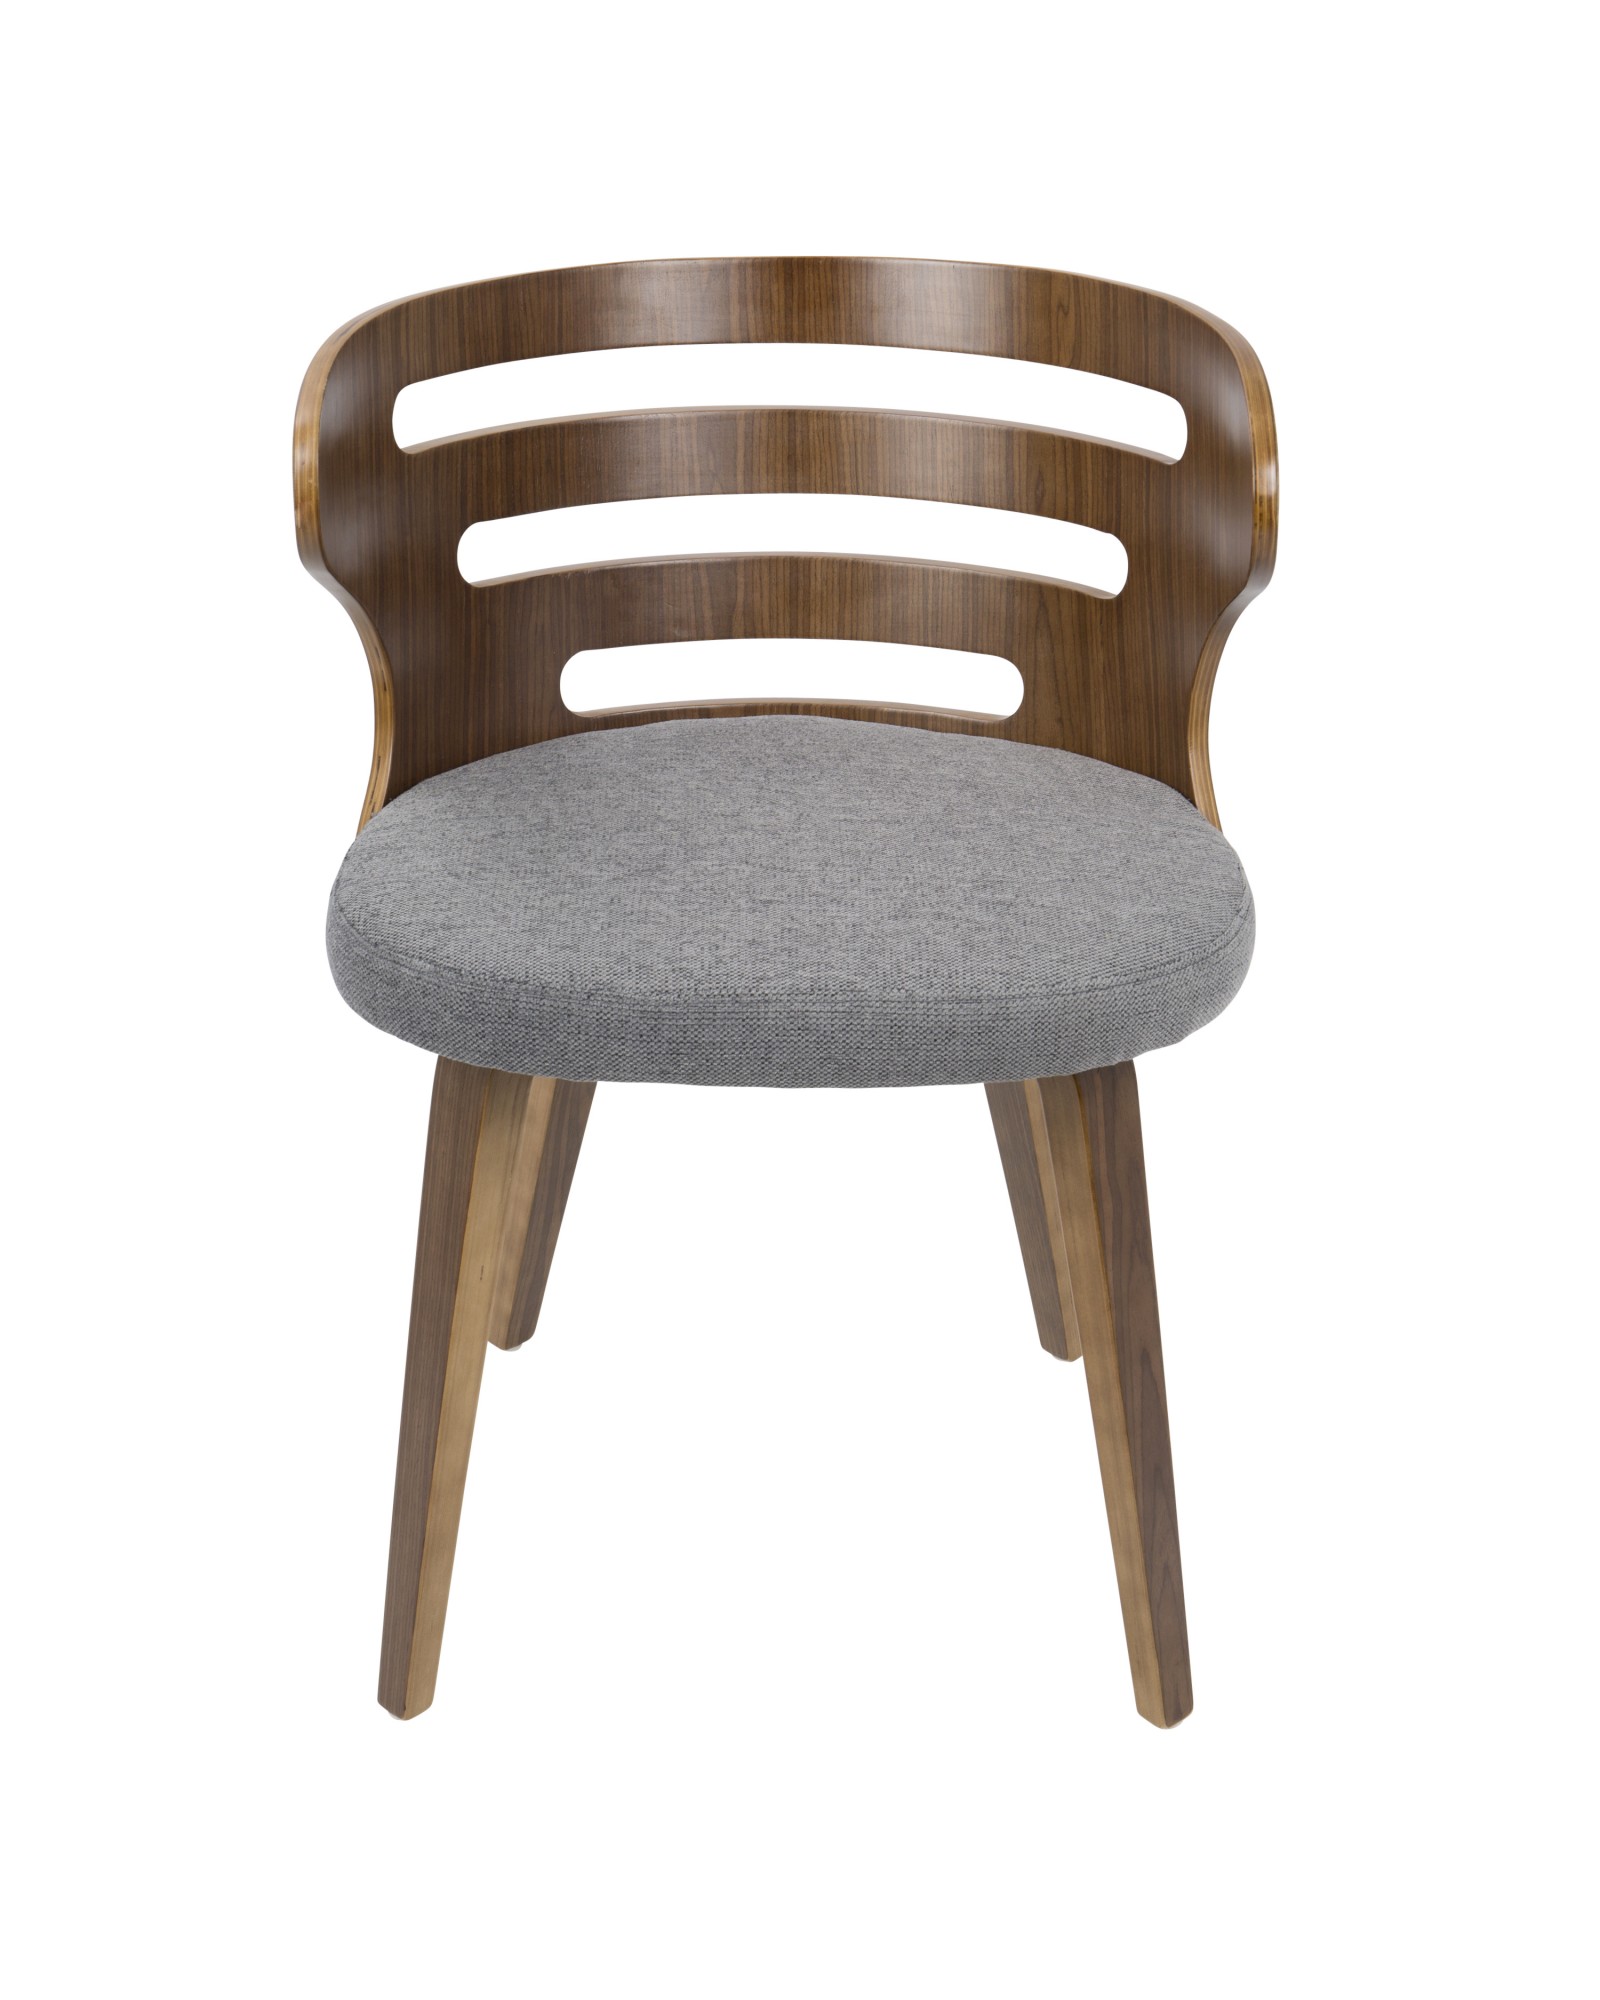 Cosi Mid-Century Modern Dining/Accent Chair in Walnut and Grey Fabric